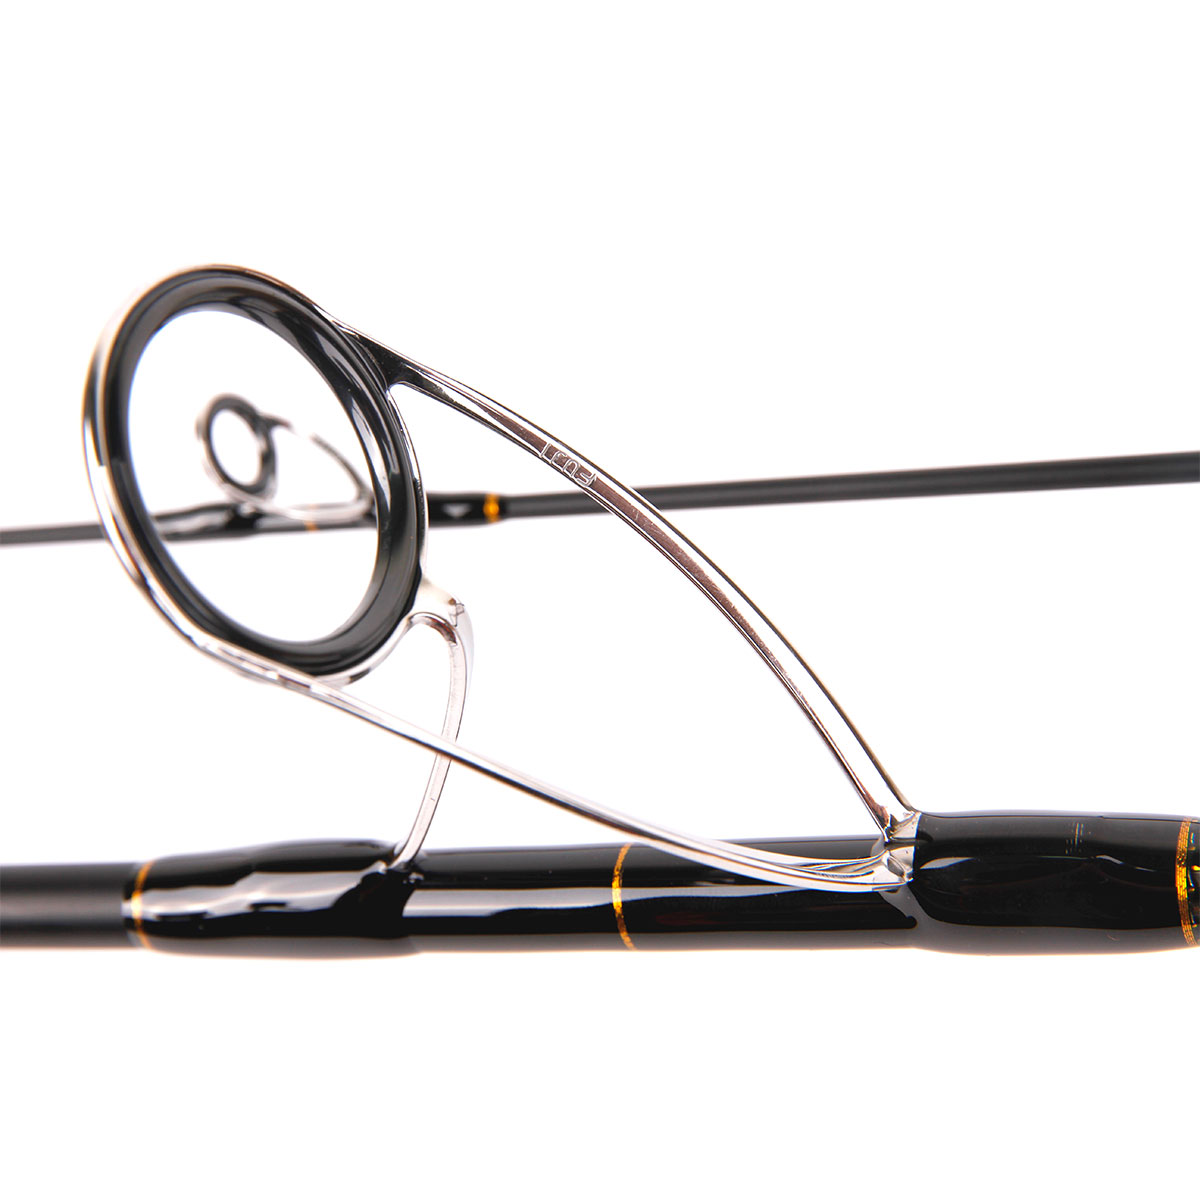 Catch Pro Series 3-Piece Top Water Xtreme Rod - BerleyPro